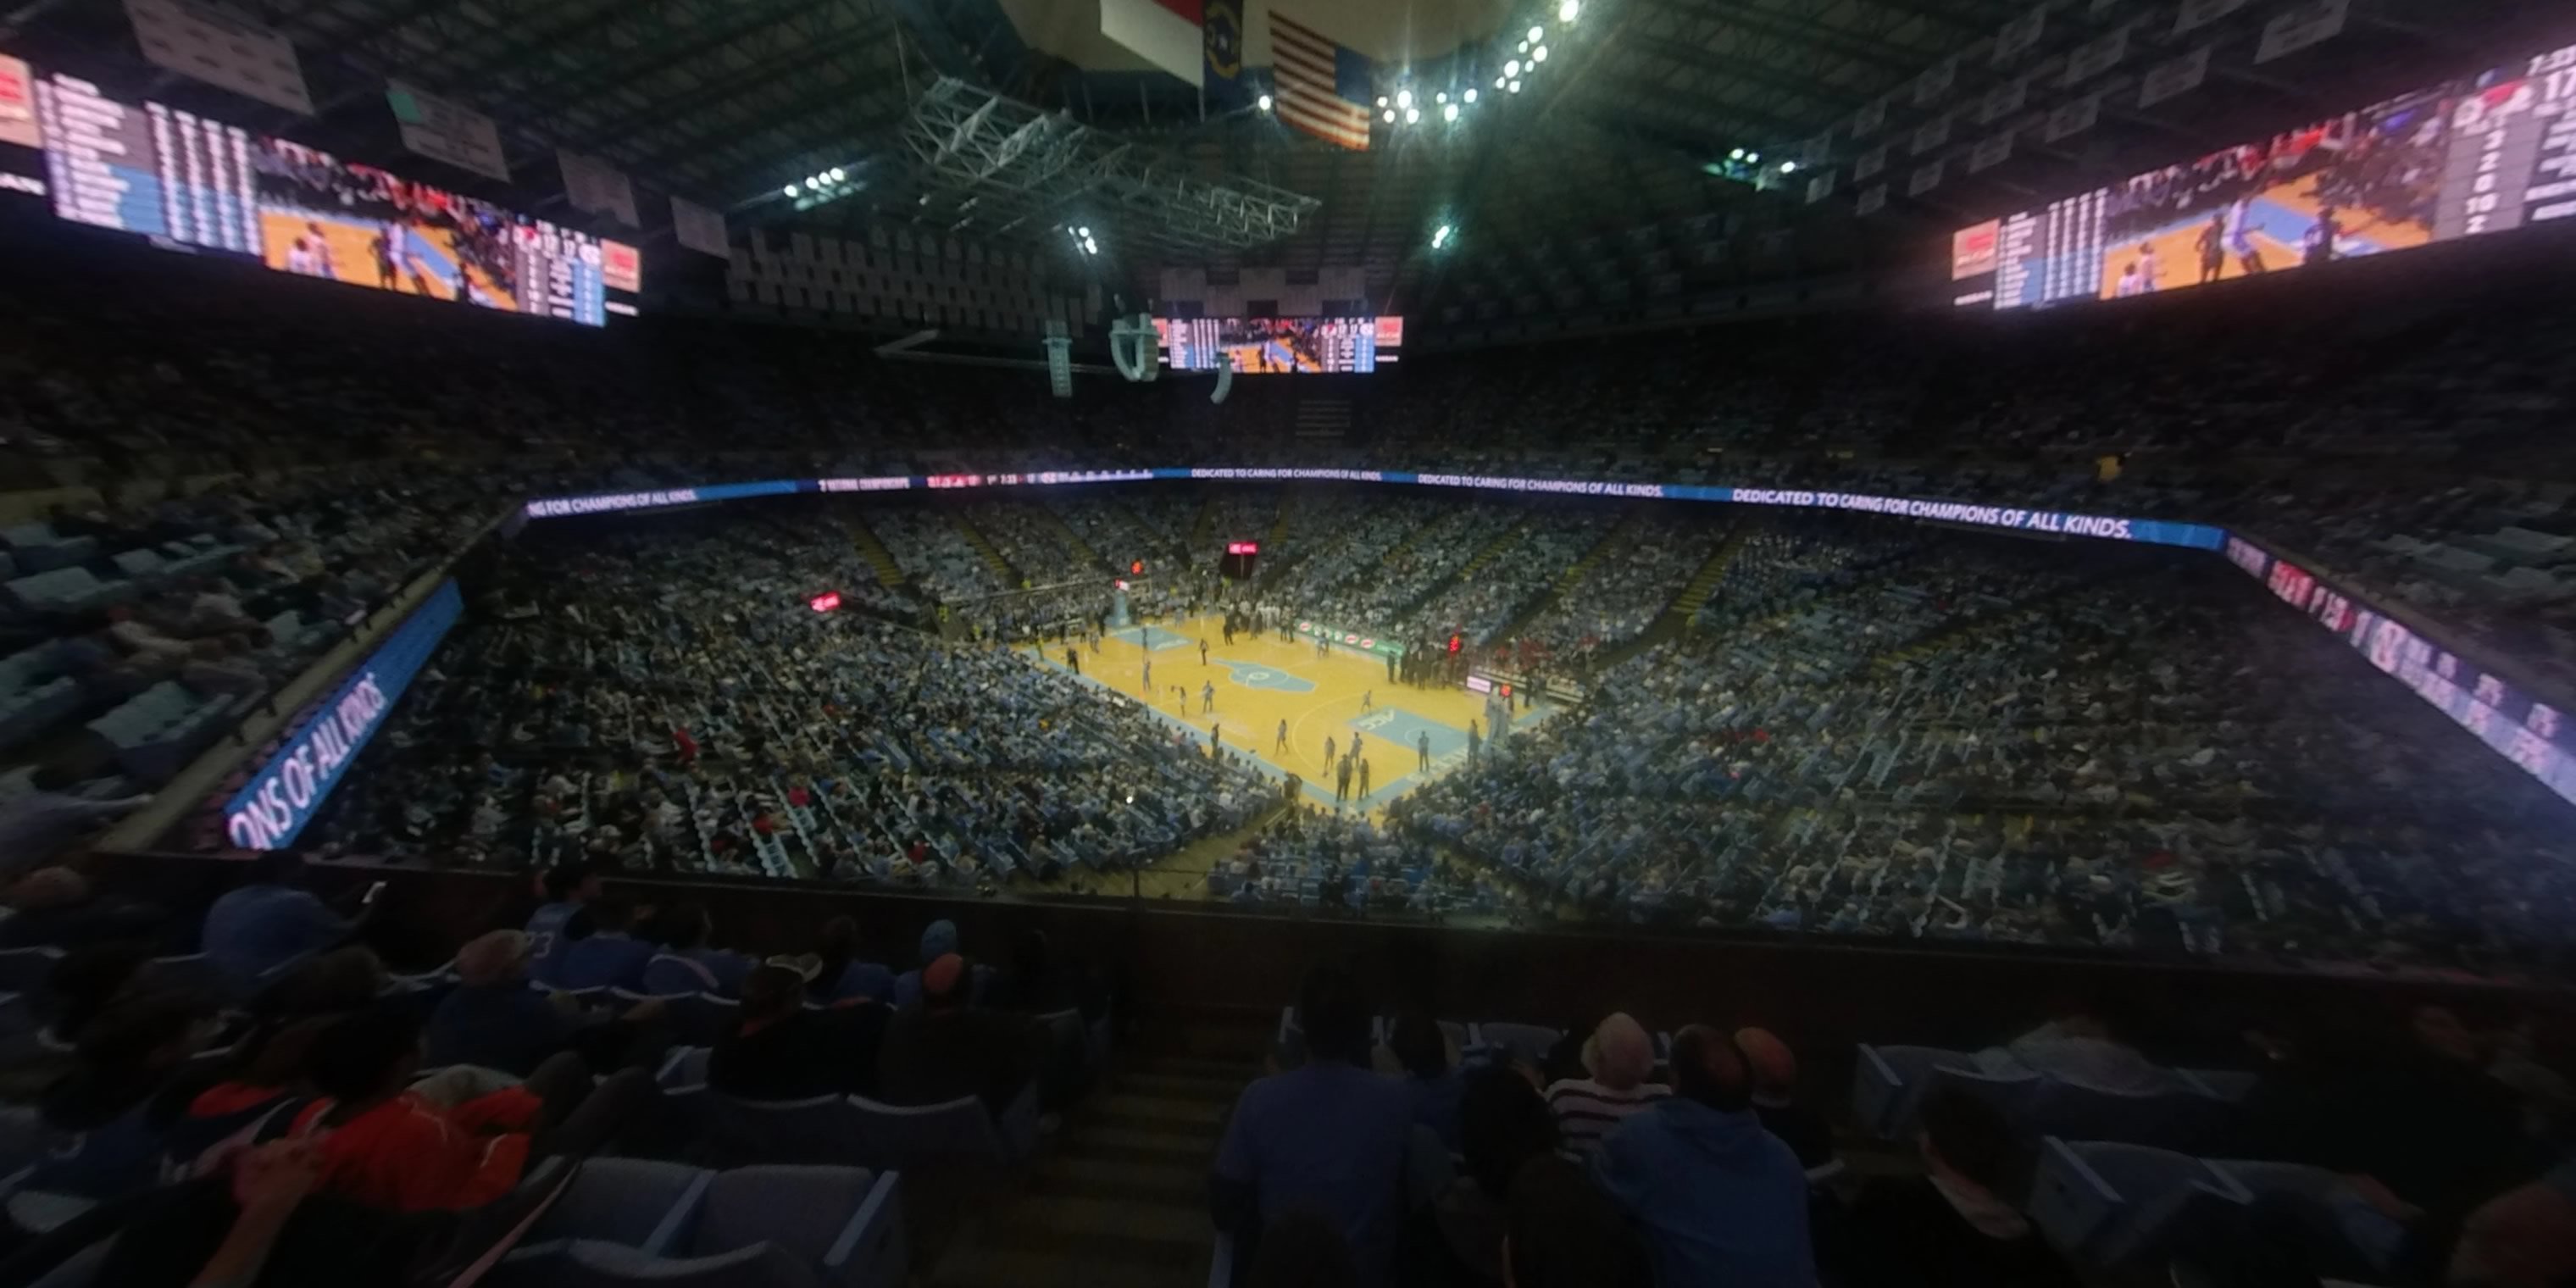 section 228a panoramic seat view  - dean smith center